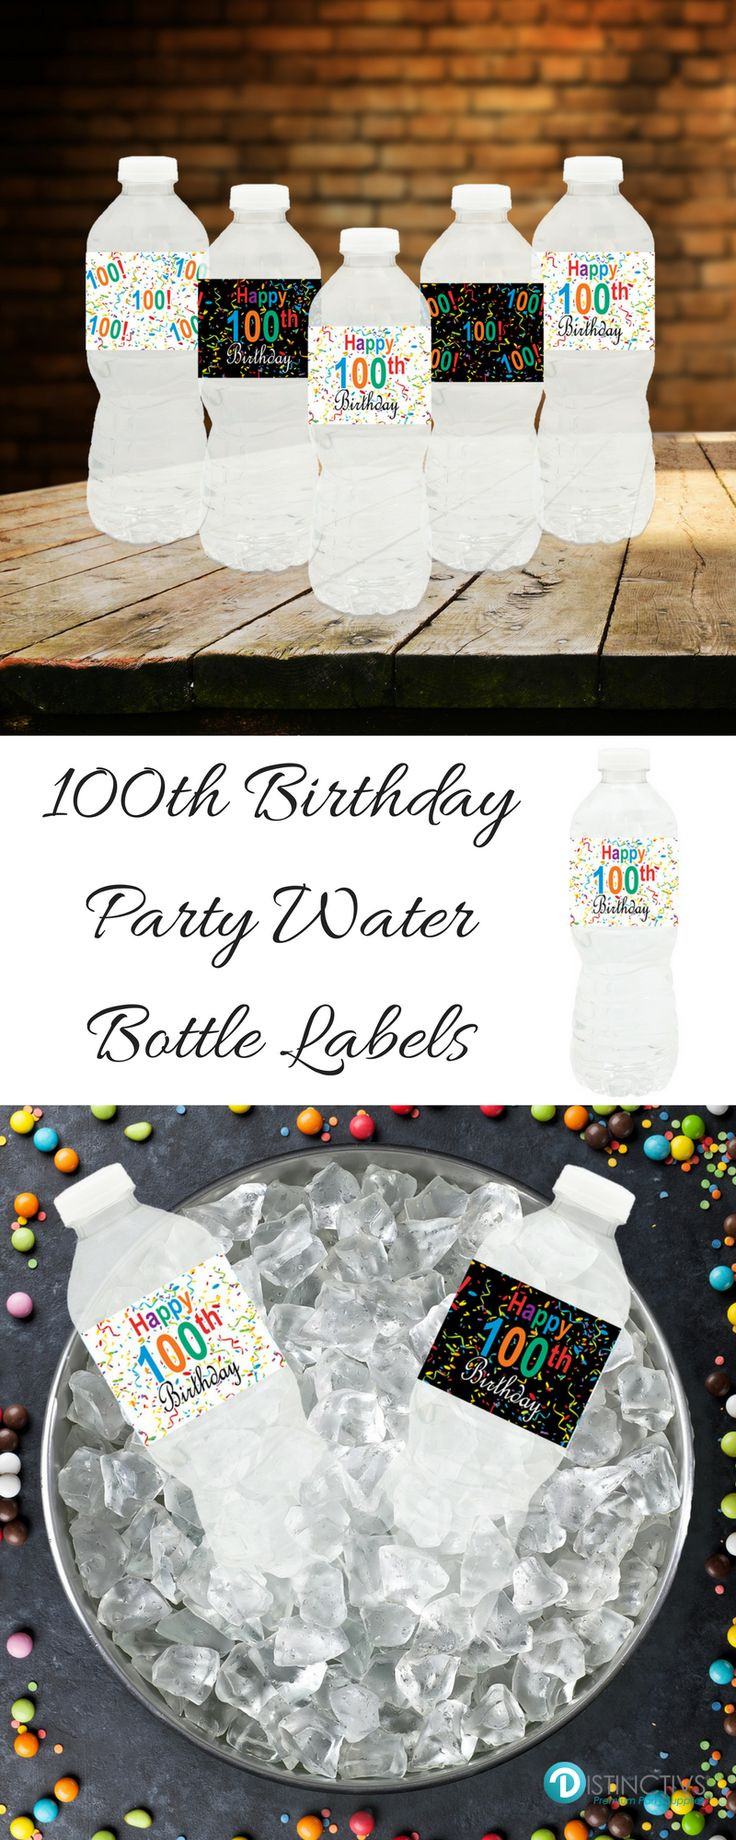 100th Birthday Decorations
 56 best 100th Happy Birthday Party Ideas images on